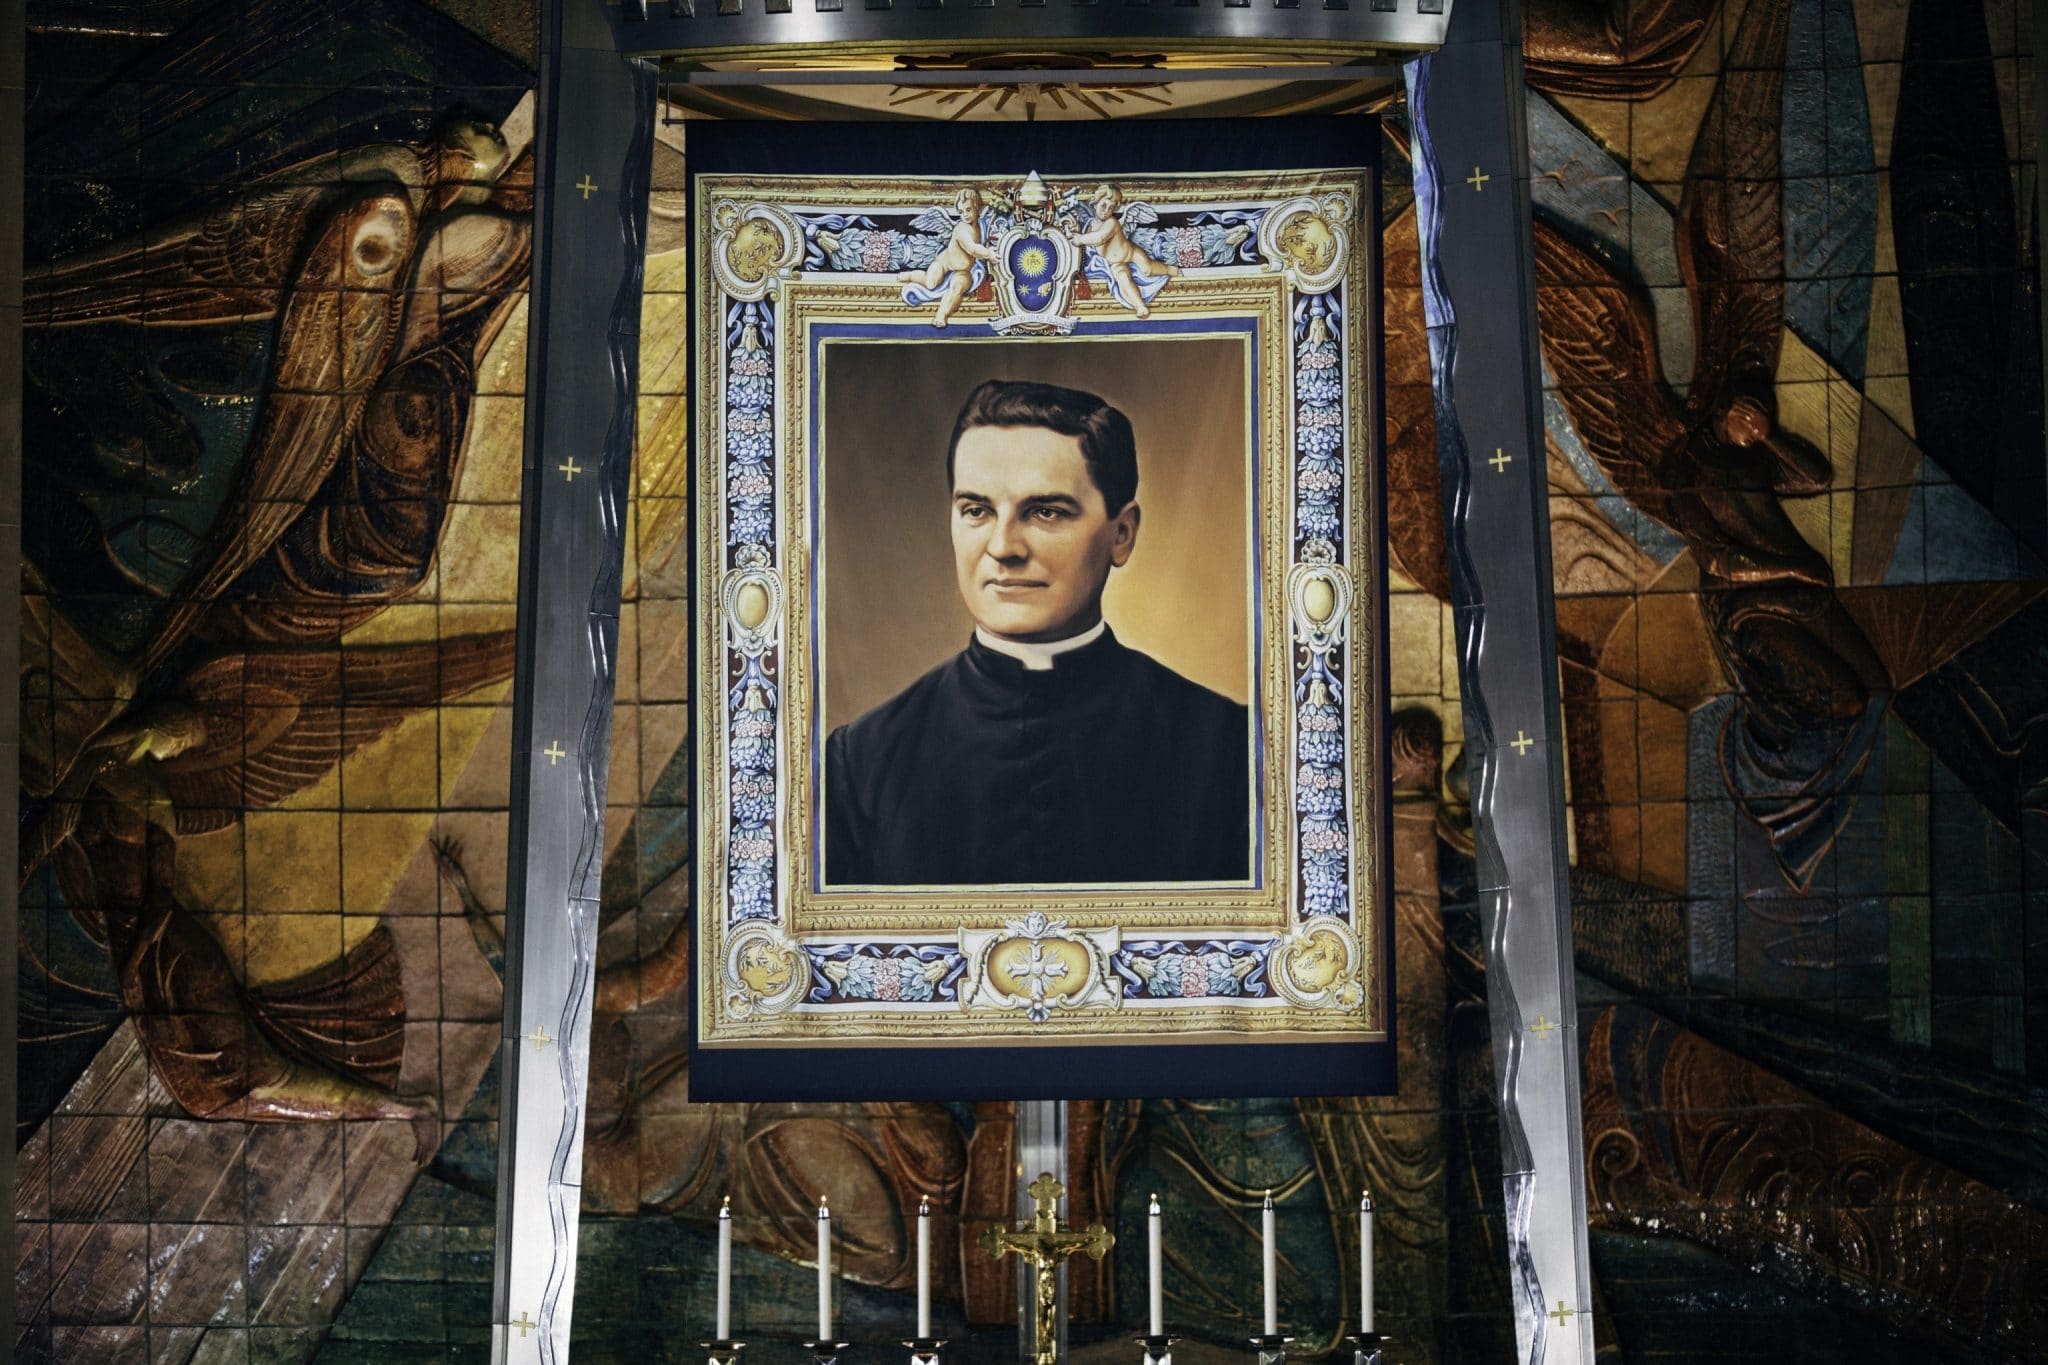 A giant tapestry with a portrait of Bl. Michael McGivney, founder of the Knights of Columbus